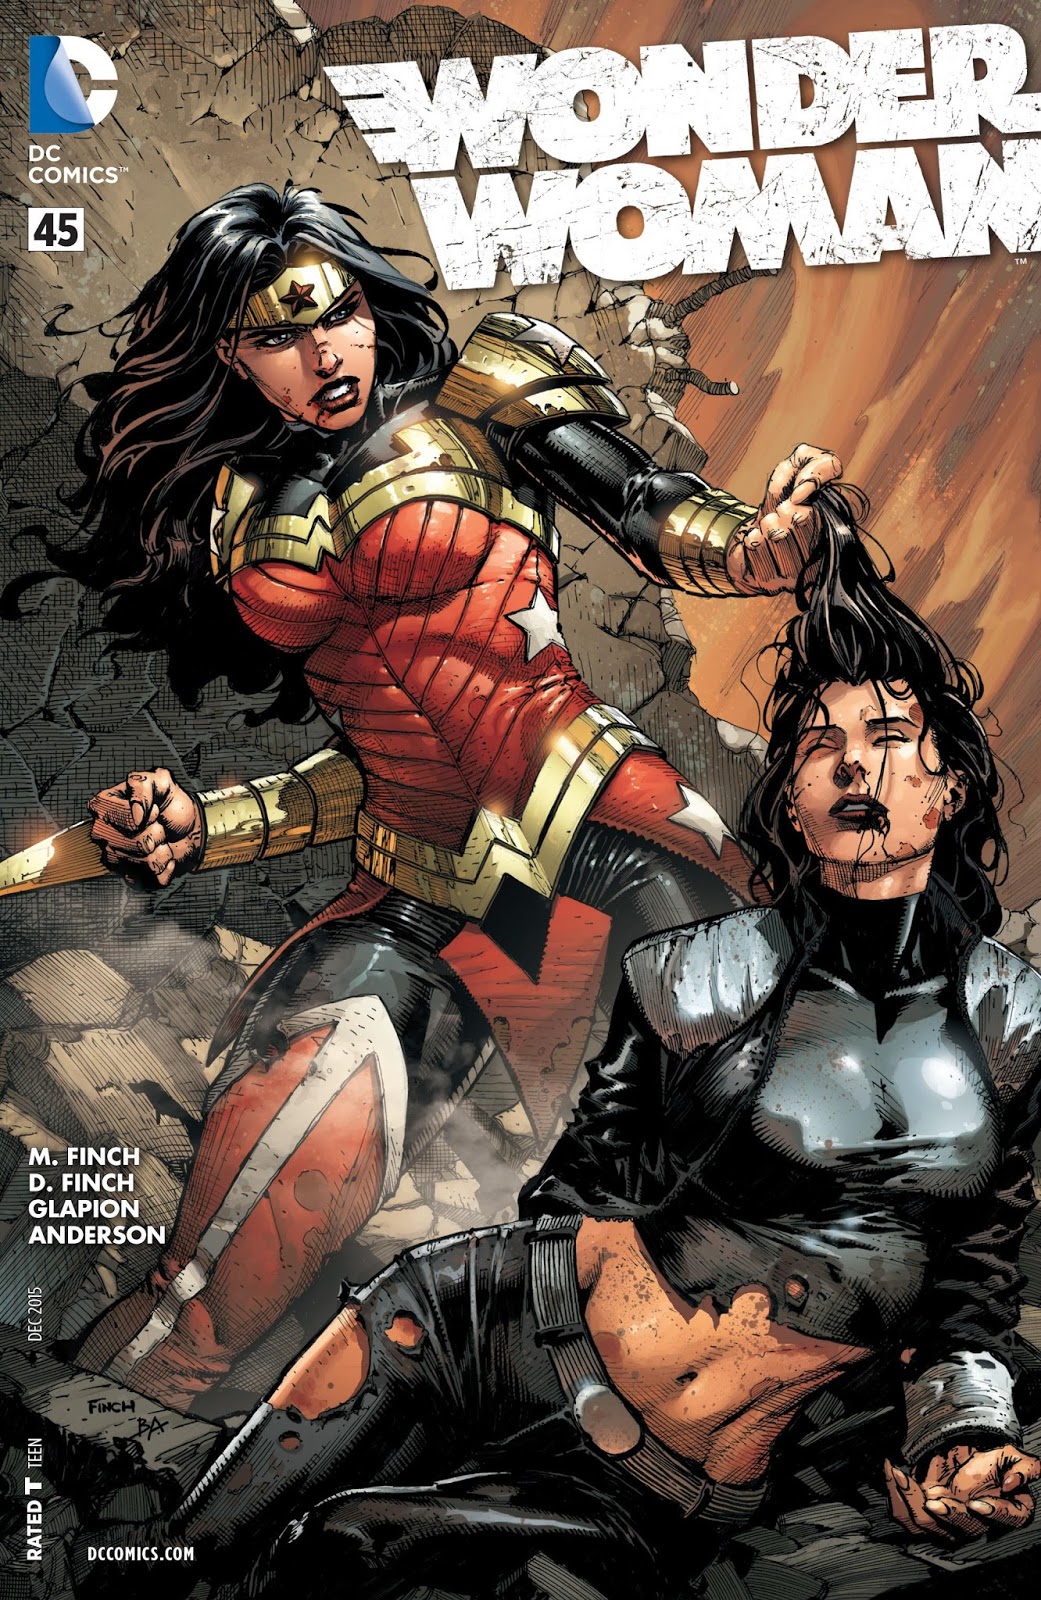 Weird Science DC Comics: Wonder Woman #45 Review and *SPOILERS*